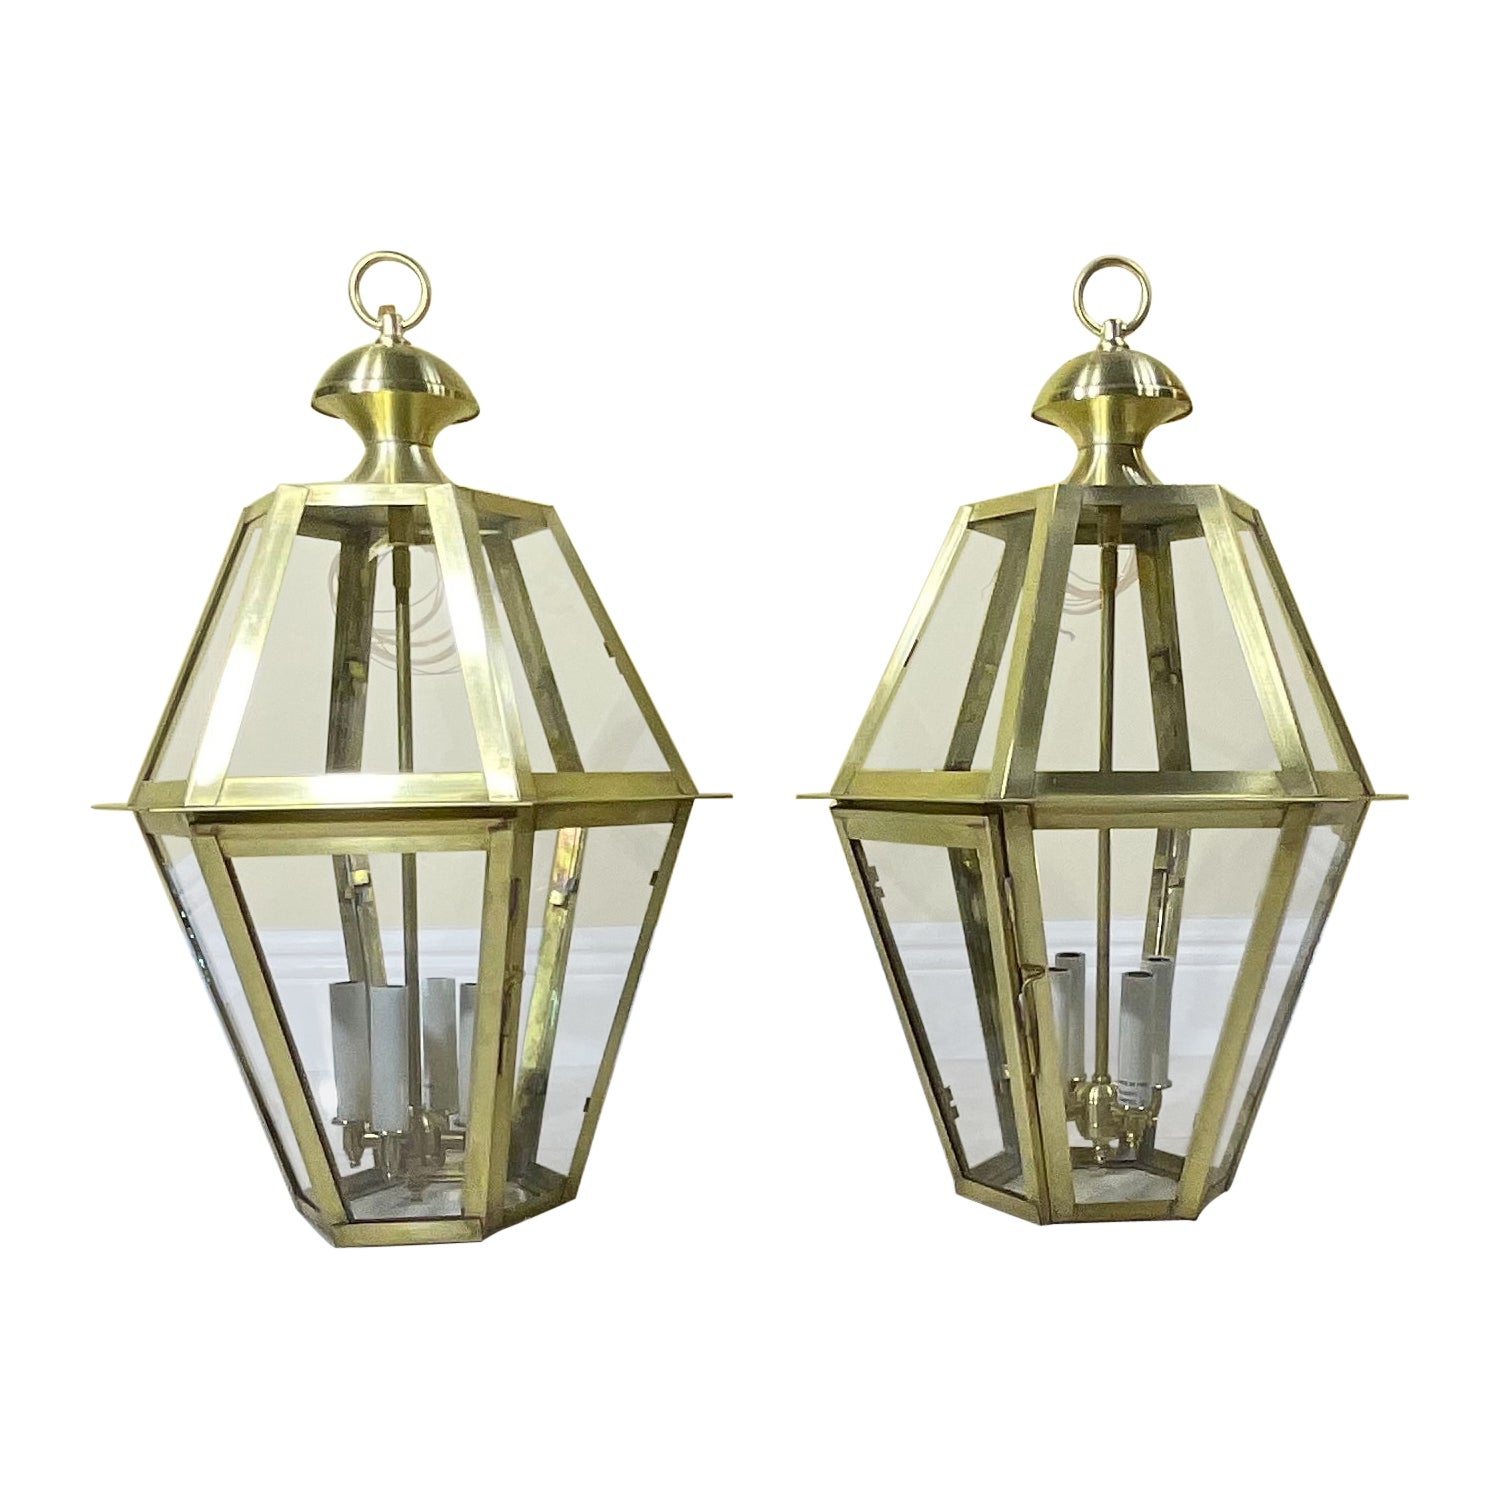 Pair Of Six Sides Solid  Brass Handcrafted Hanging Lanterns For Sale